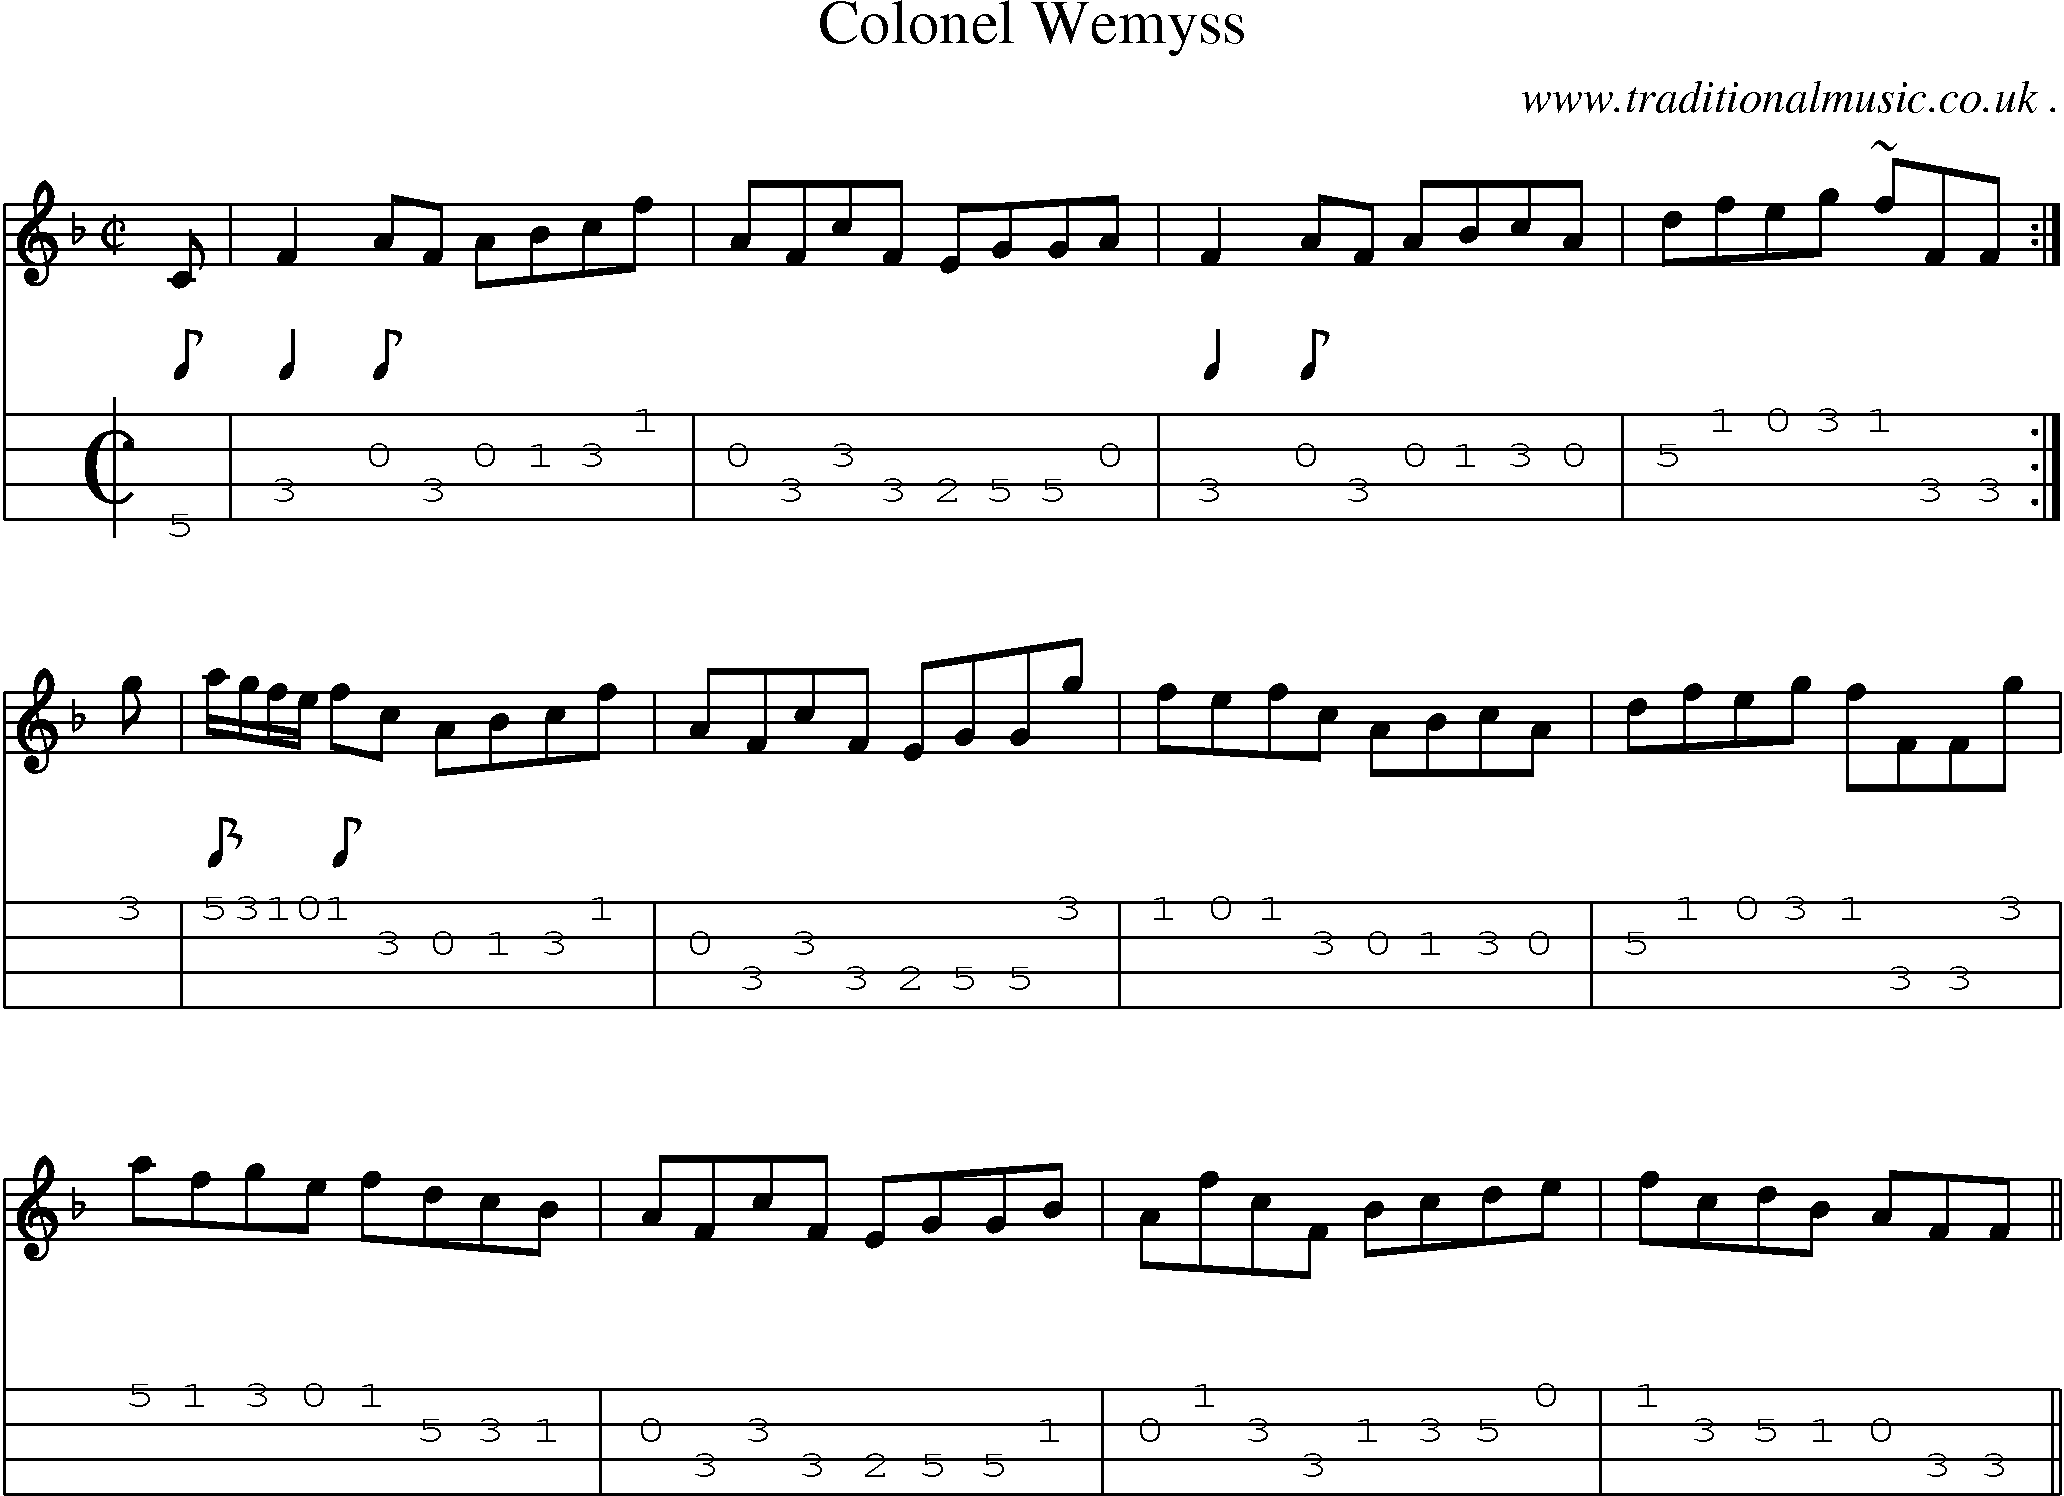 Sheet-music  score, Chords and Mandolin Tabs for Colonel Wemyss